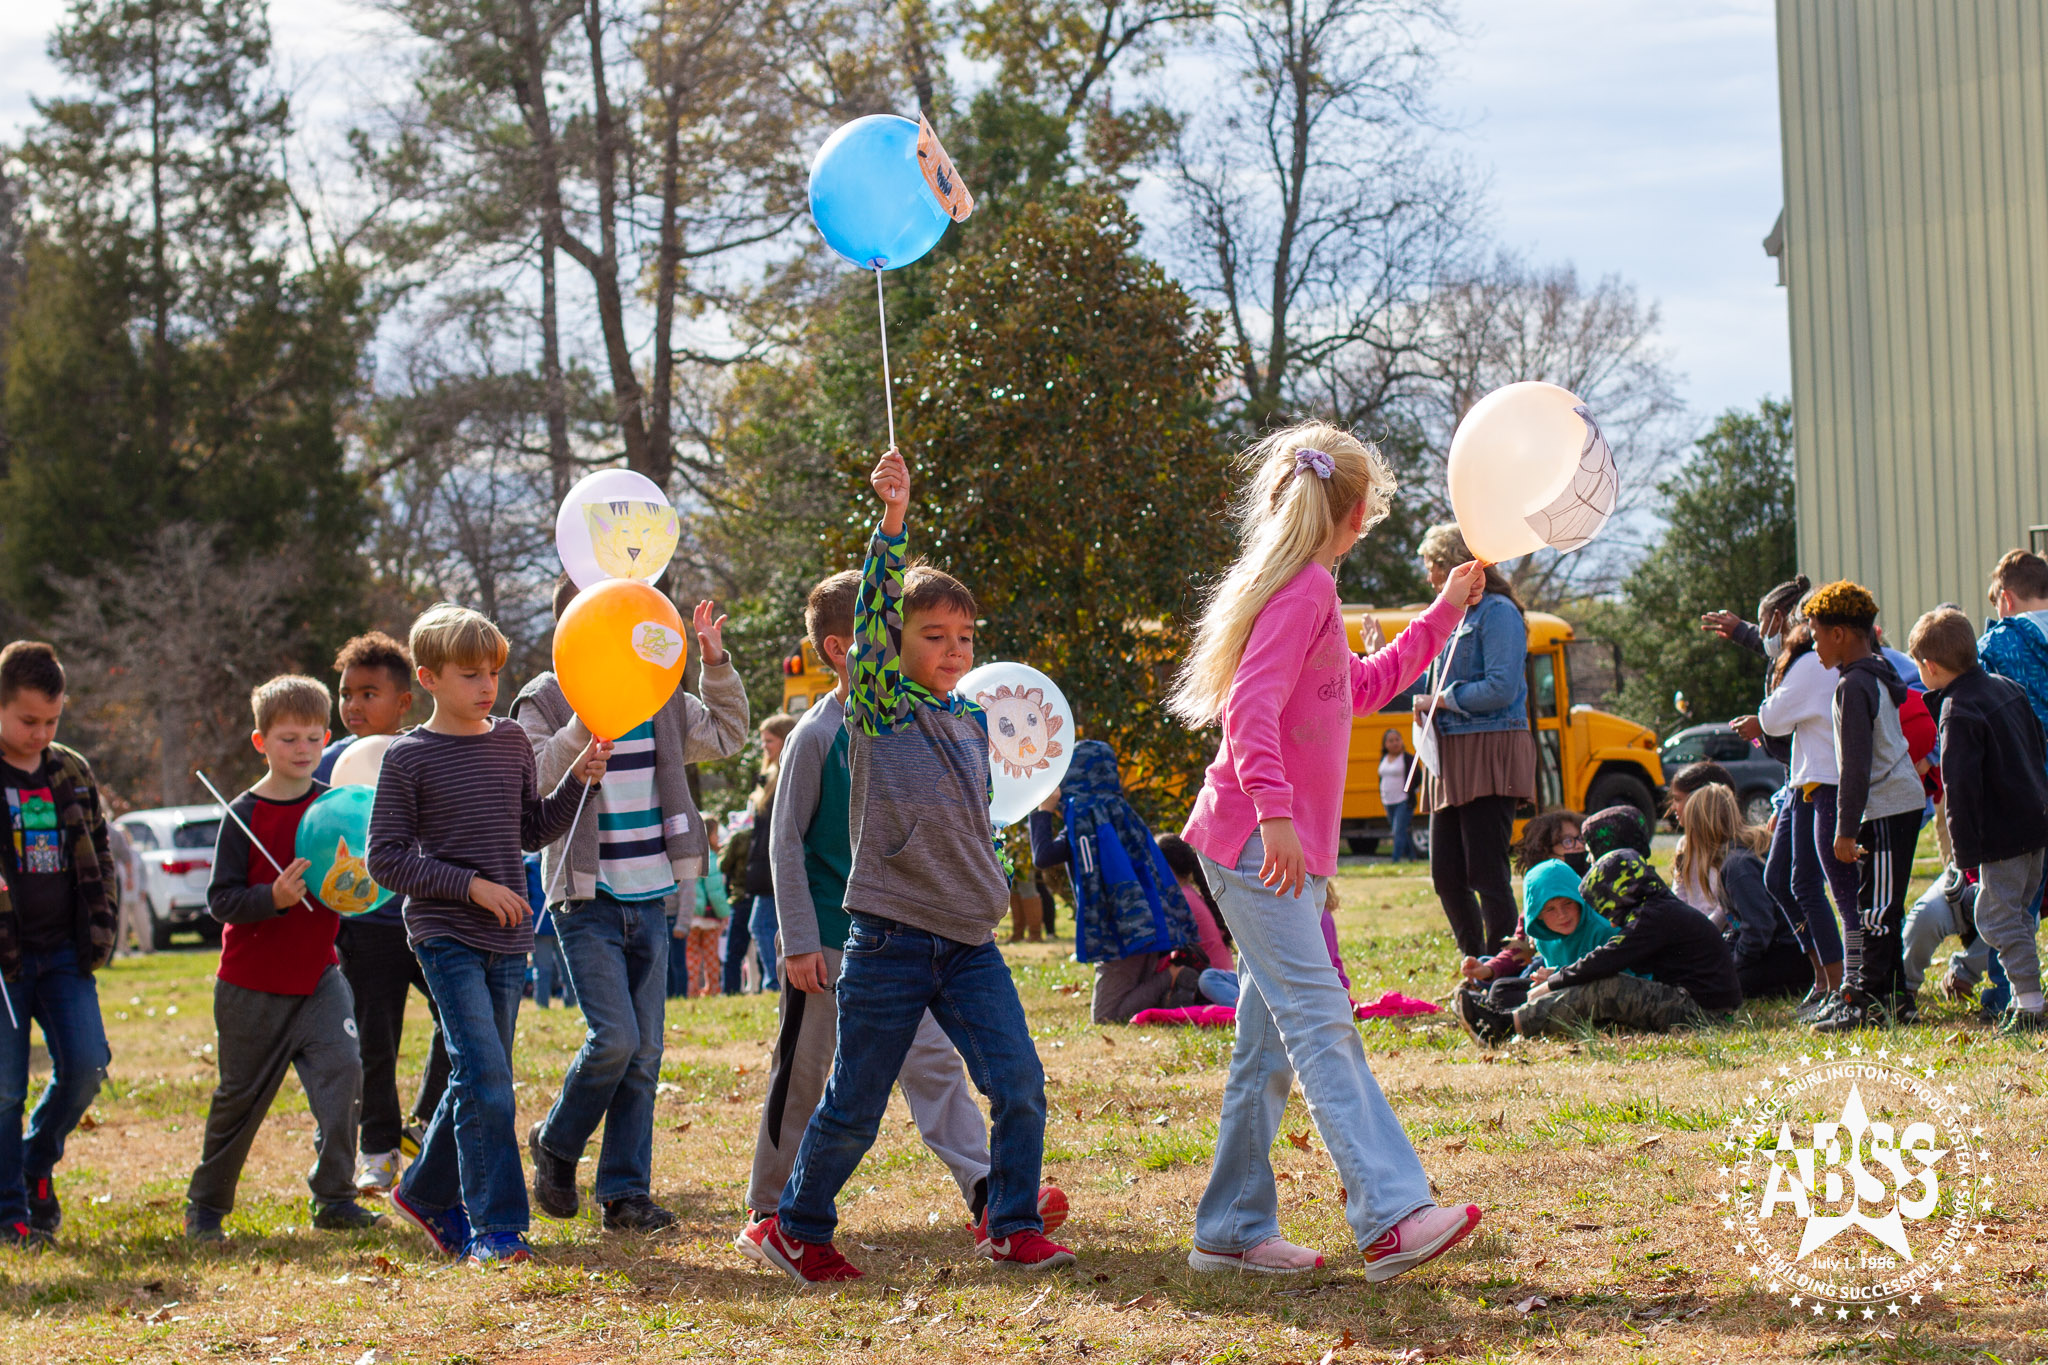 Students from Alexander Wilson Elementary march in a line carrying balloon floats they made during the Balloons Over AWE event for Thanksgiving